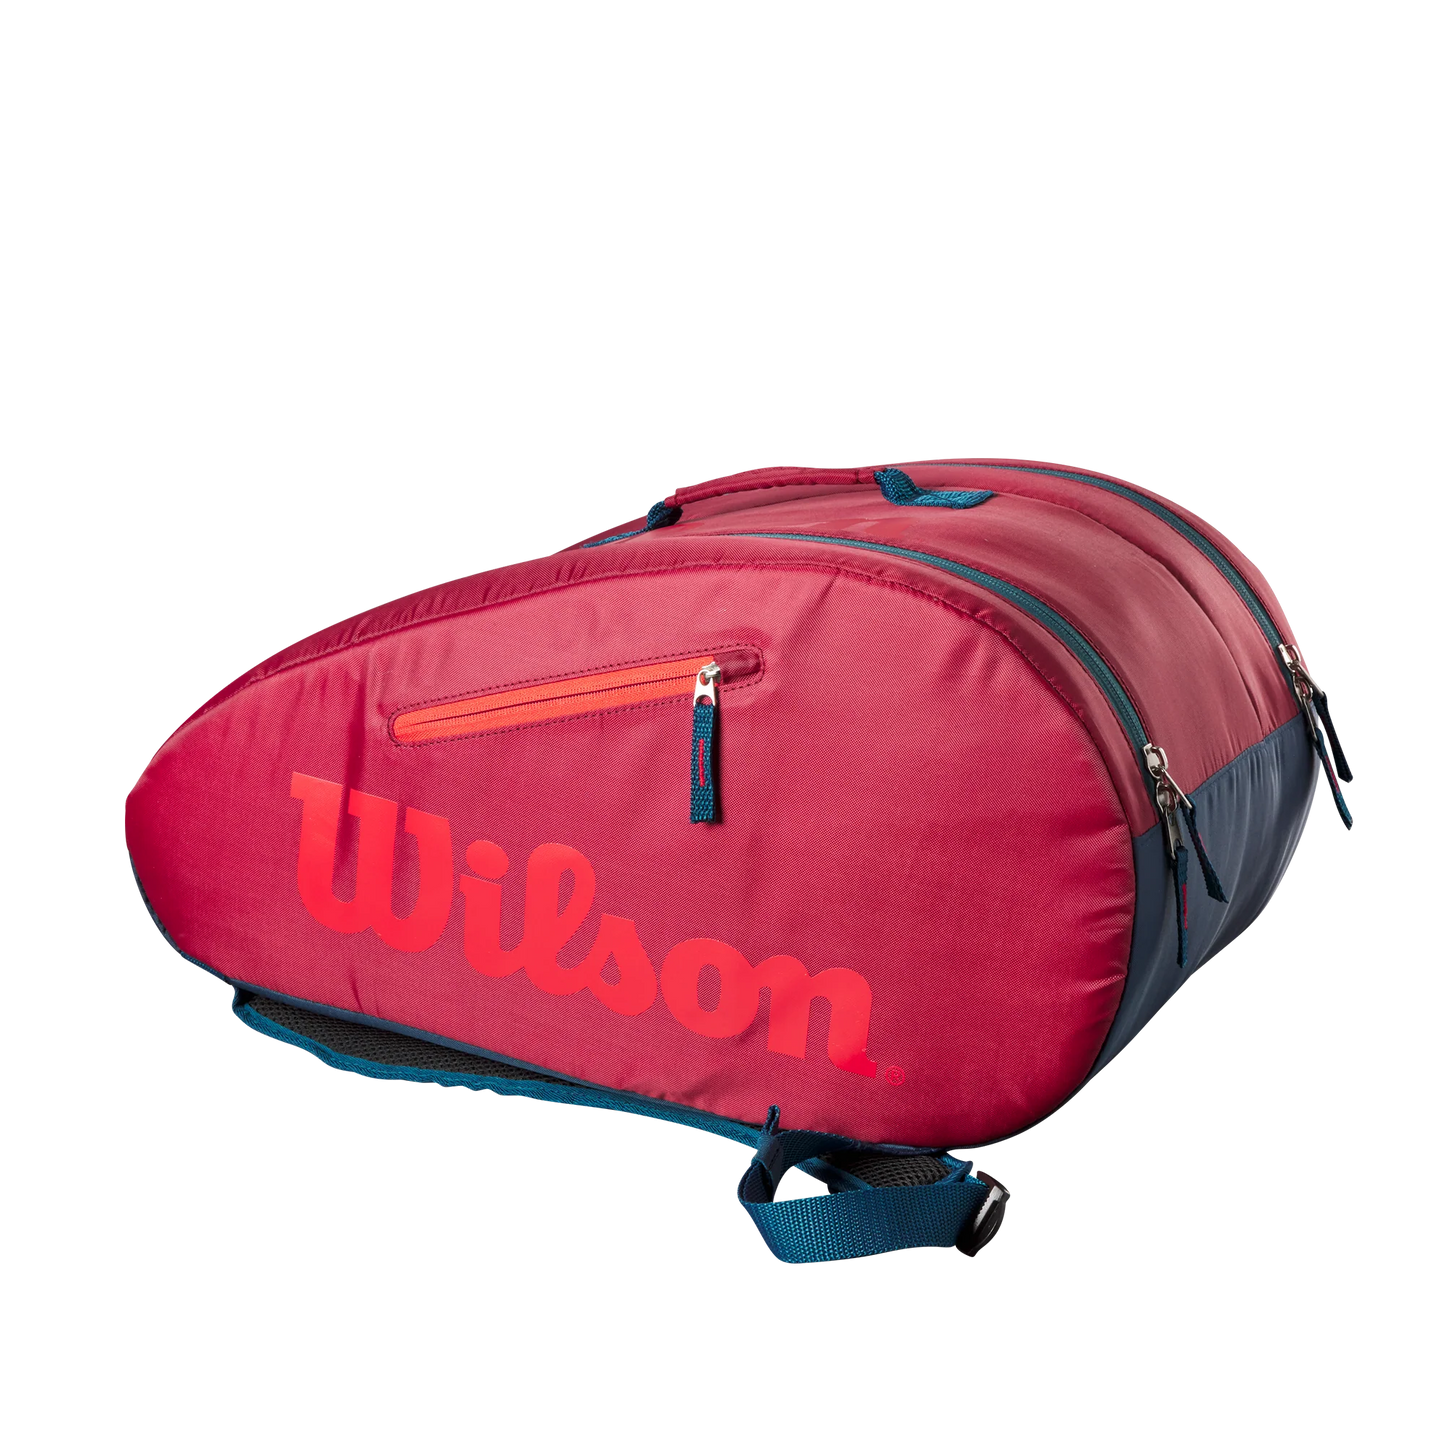 Wilson Junior Padel Bag Red/Infrared  which is available for sale at GSM Sports